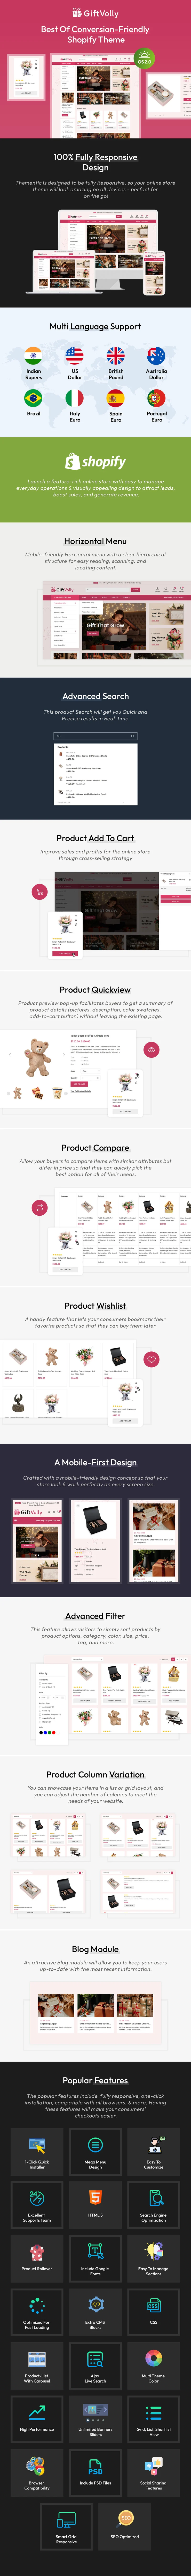 A set of different templates web version giftvolly - gift and souvenir shopify theme in black, red, white and blue.